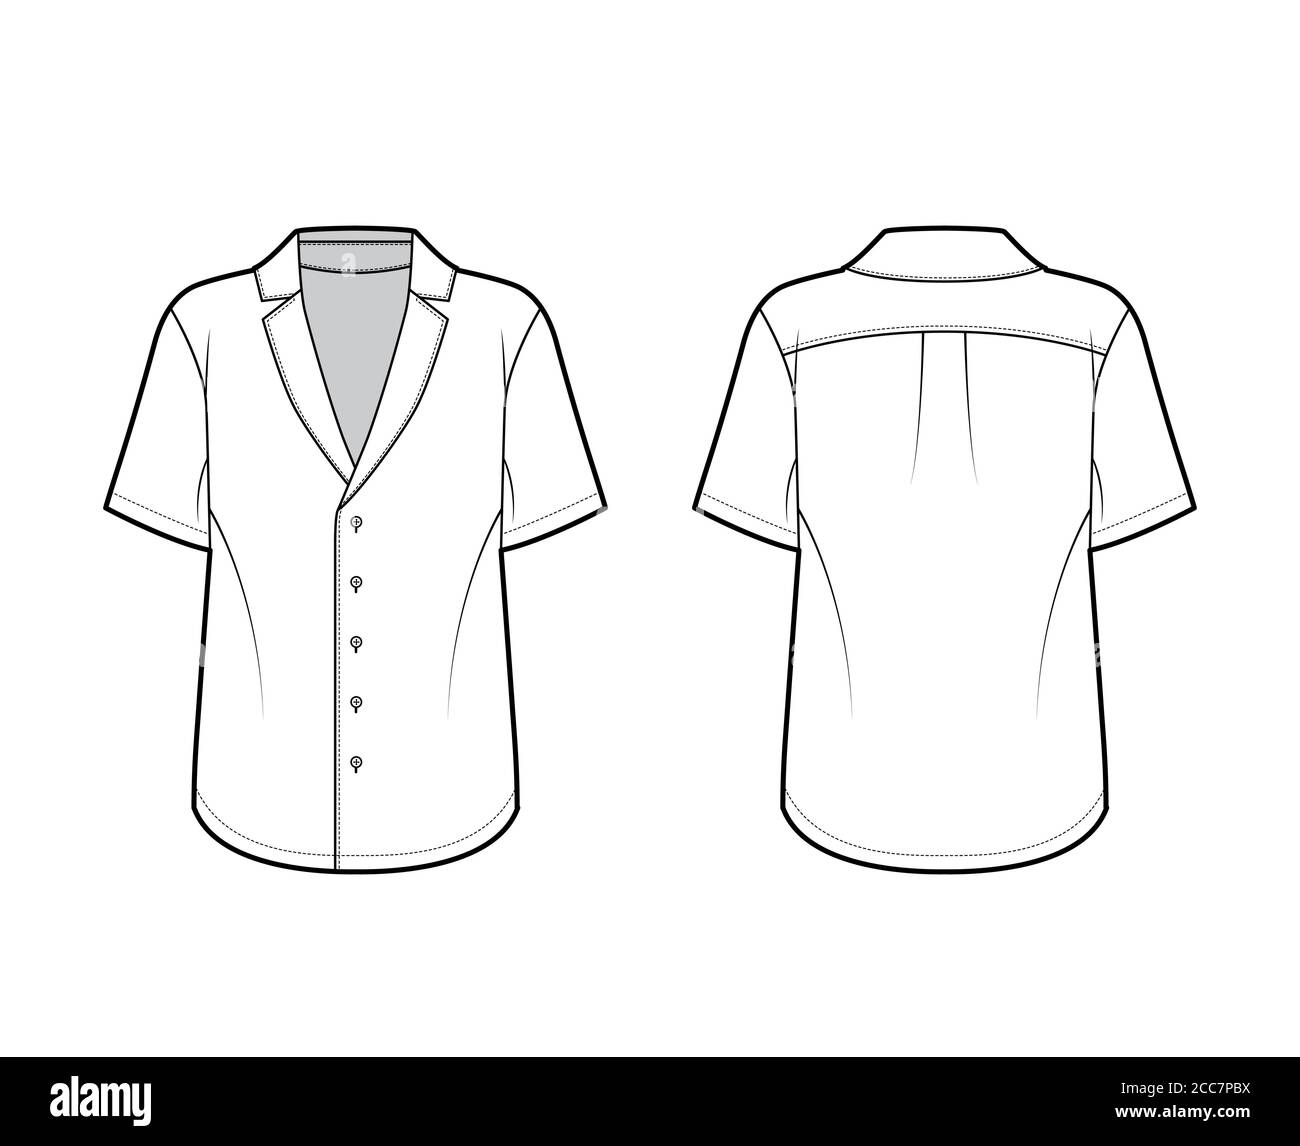 Pajama-style shirt technical fashion illustration with loose silhouette ...